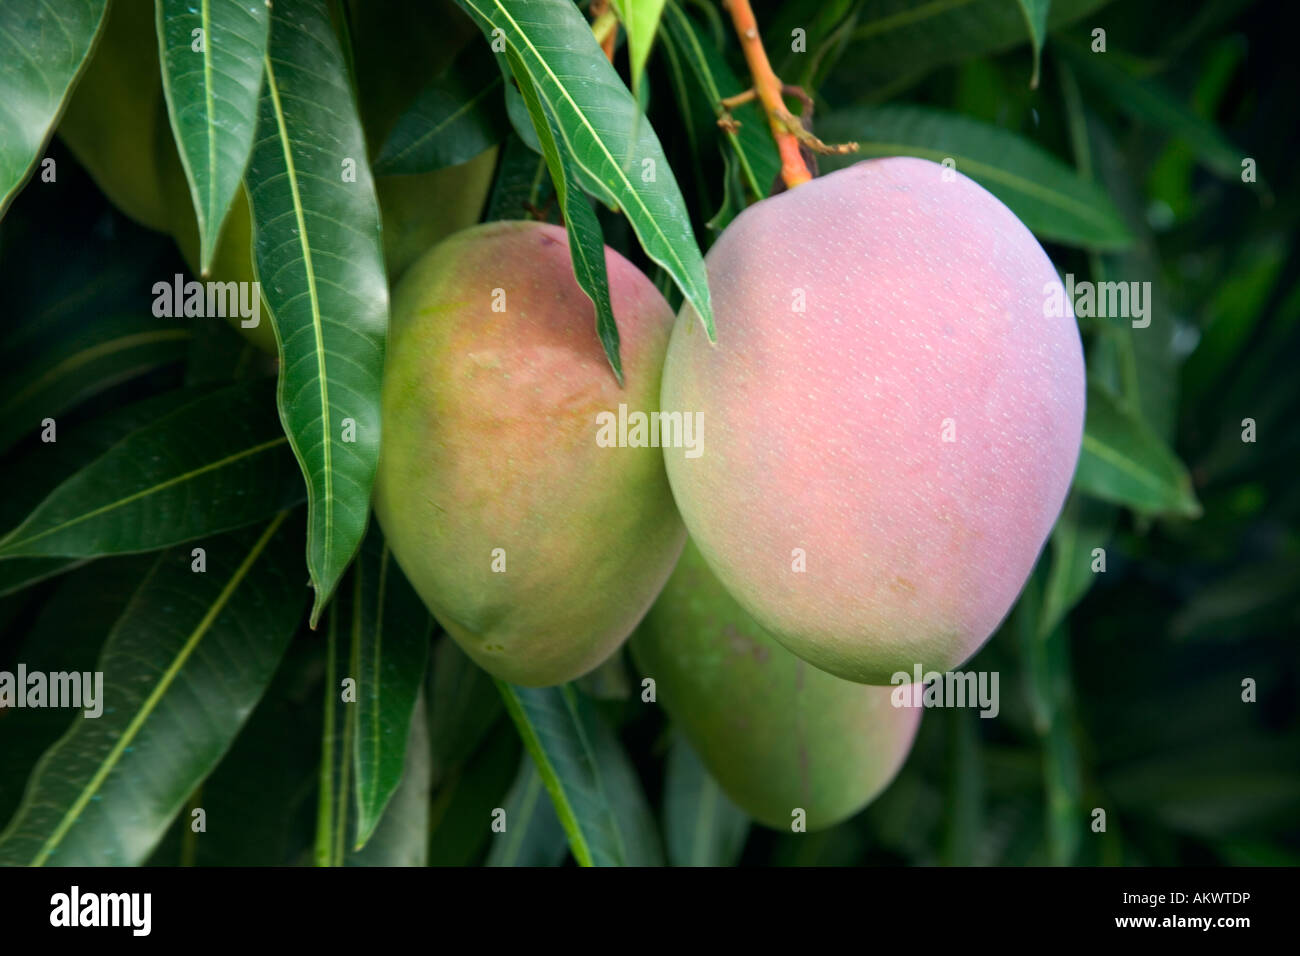 Mature mangoes growing on branch. Stock Photo